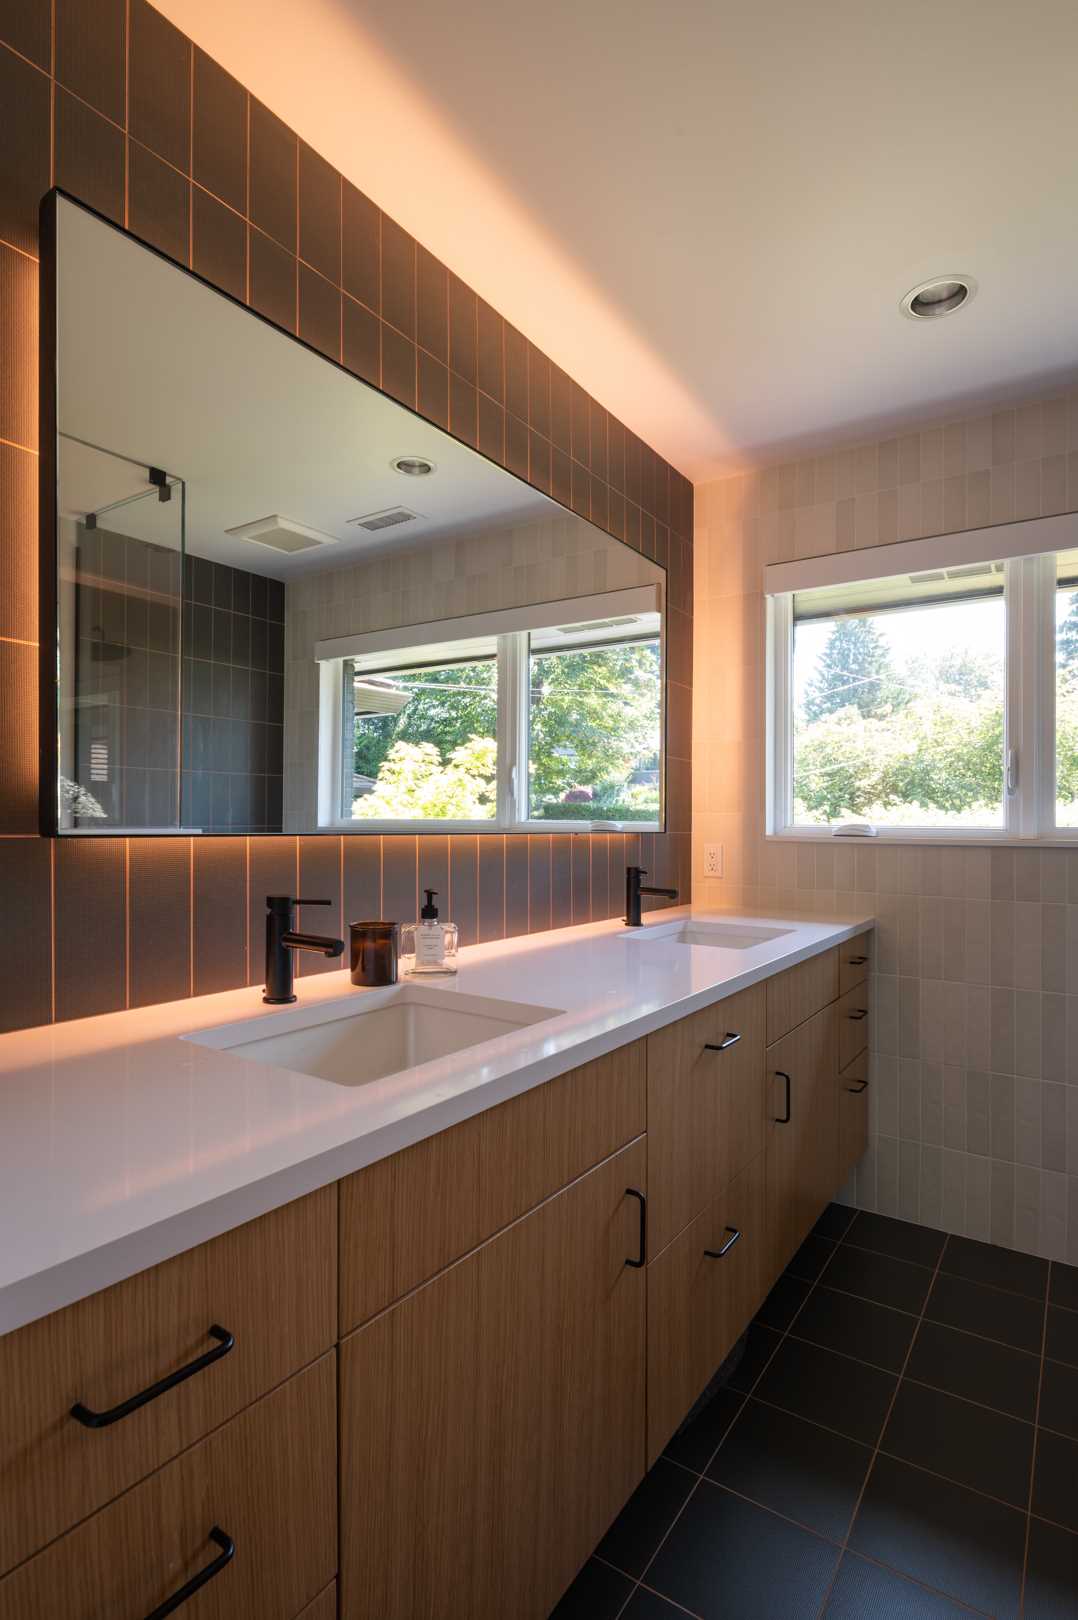 The updated primary bathroom received a changed layout, with the new double vanity located on the left wall, and the shower and toilet now located on the right. A glass shower screen allows the natural light from the window to flow through the space. Additional light has been added to the bathroom in the form of hidden LEDs behind the mirror.